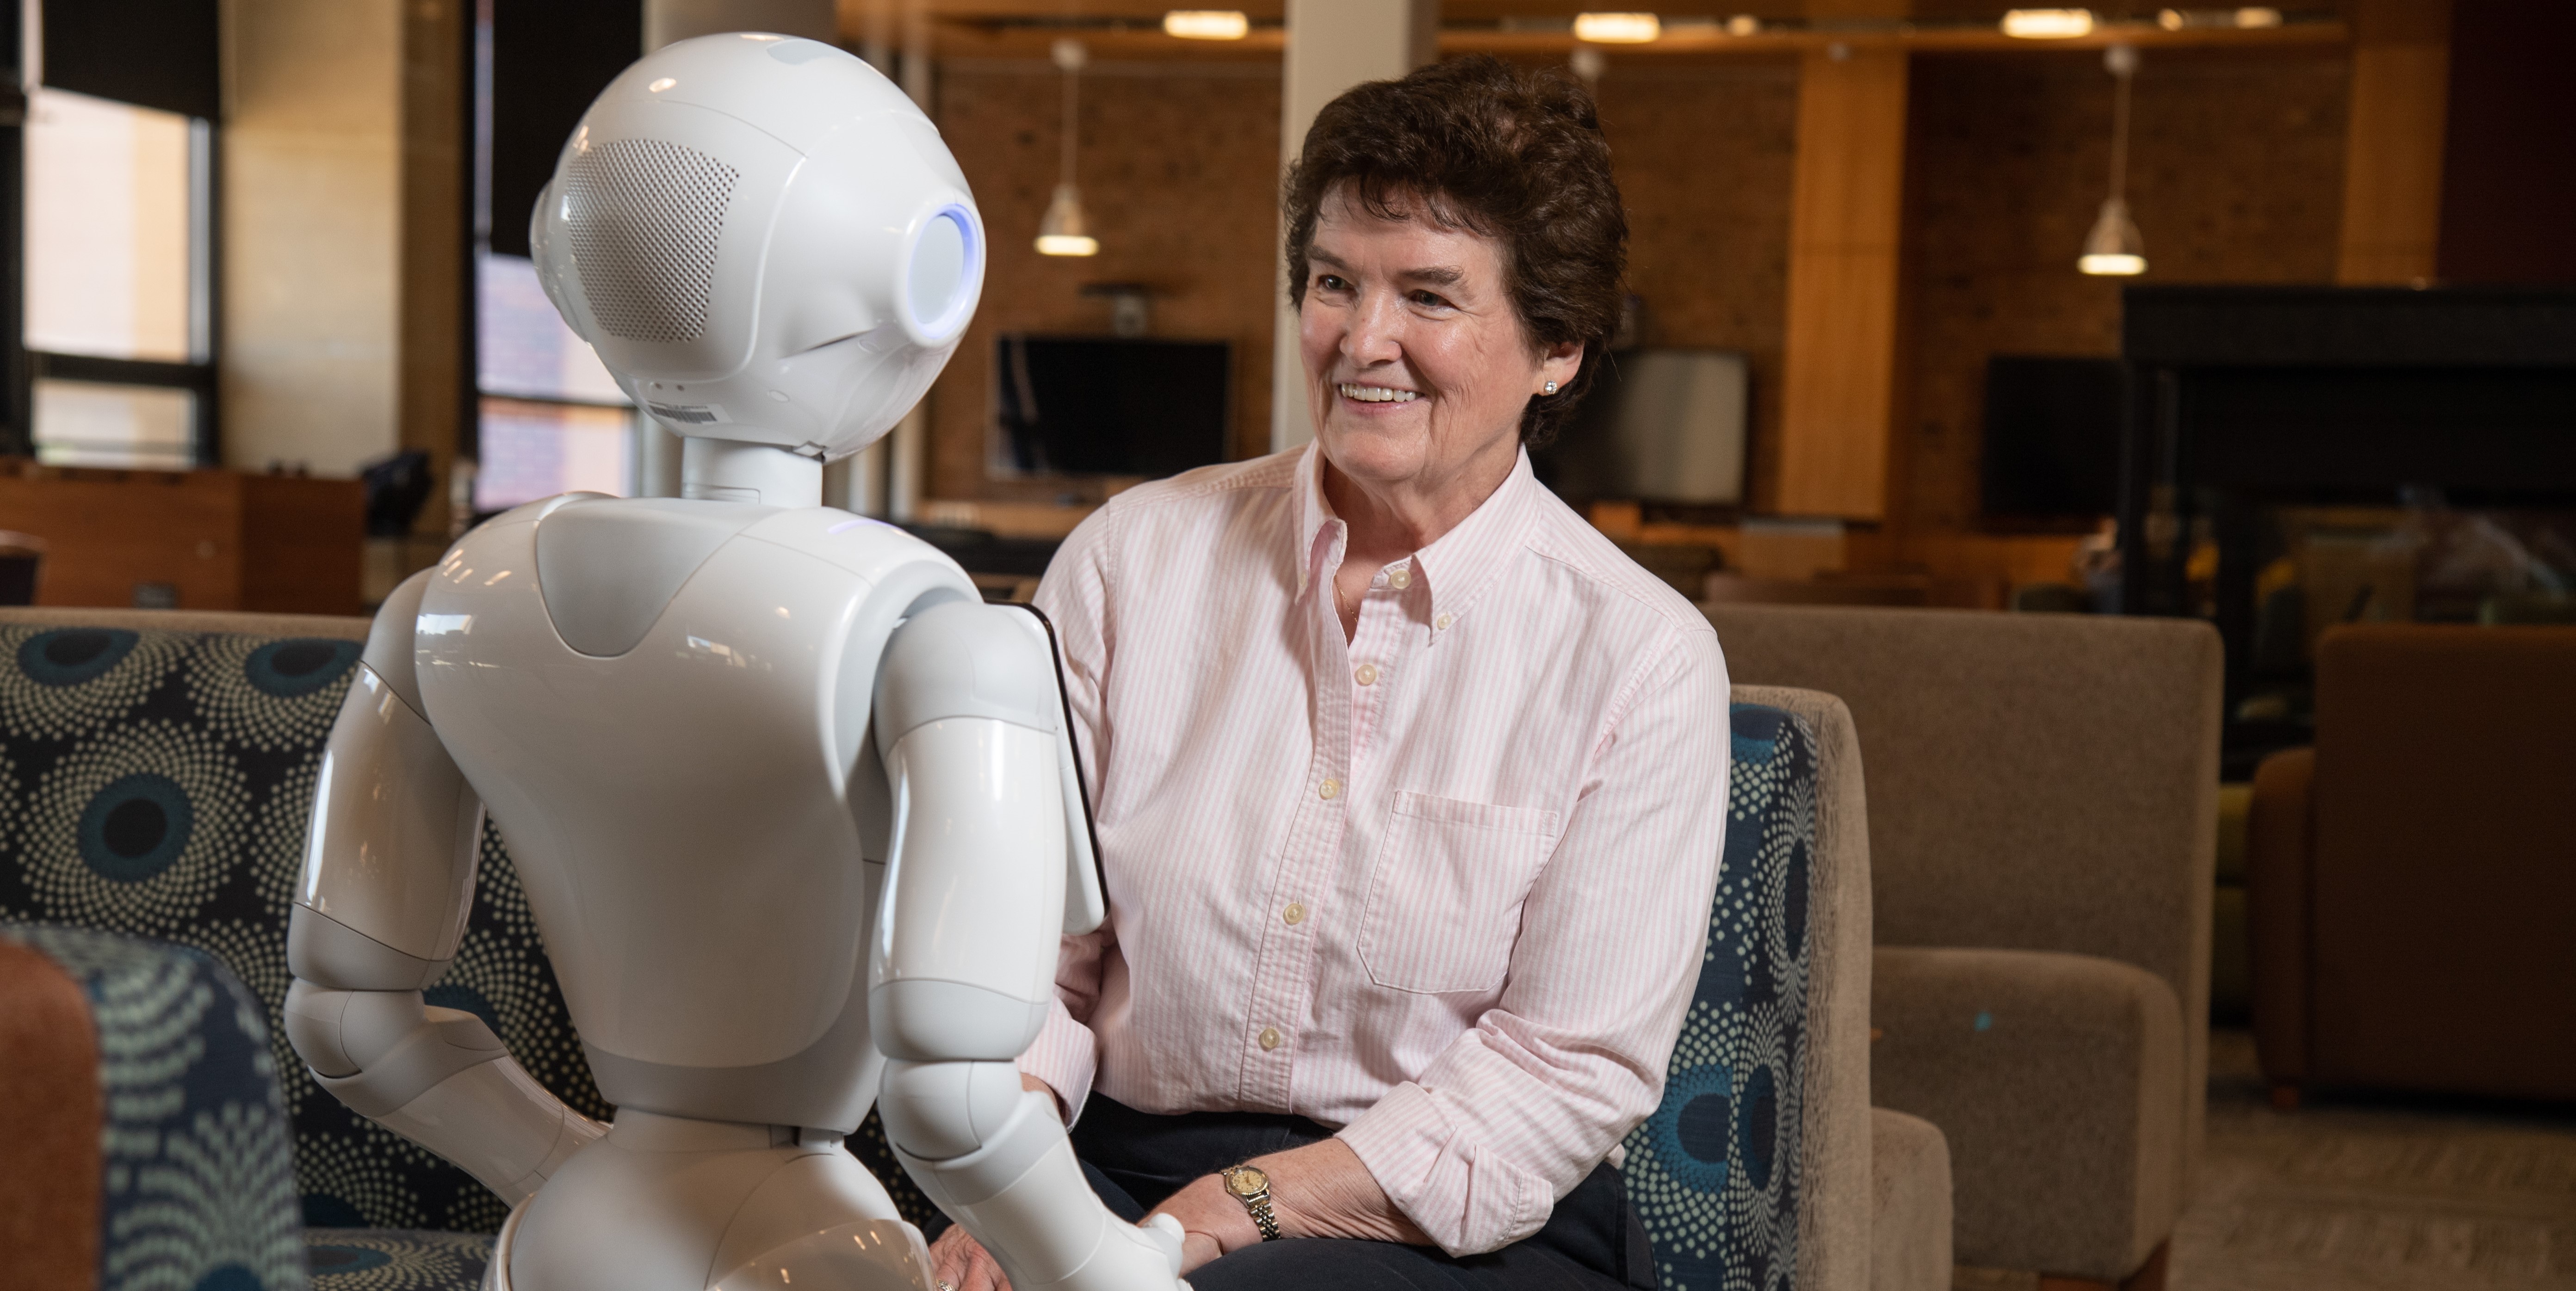 A seated woman chats with Pepper the robot